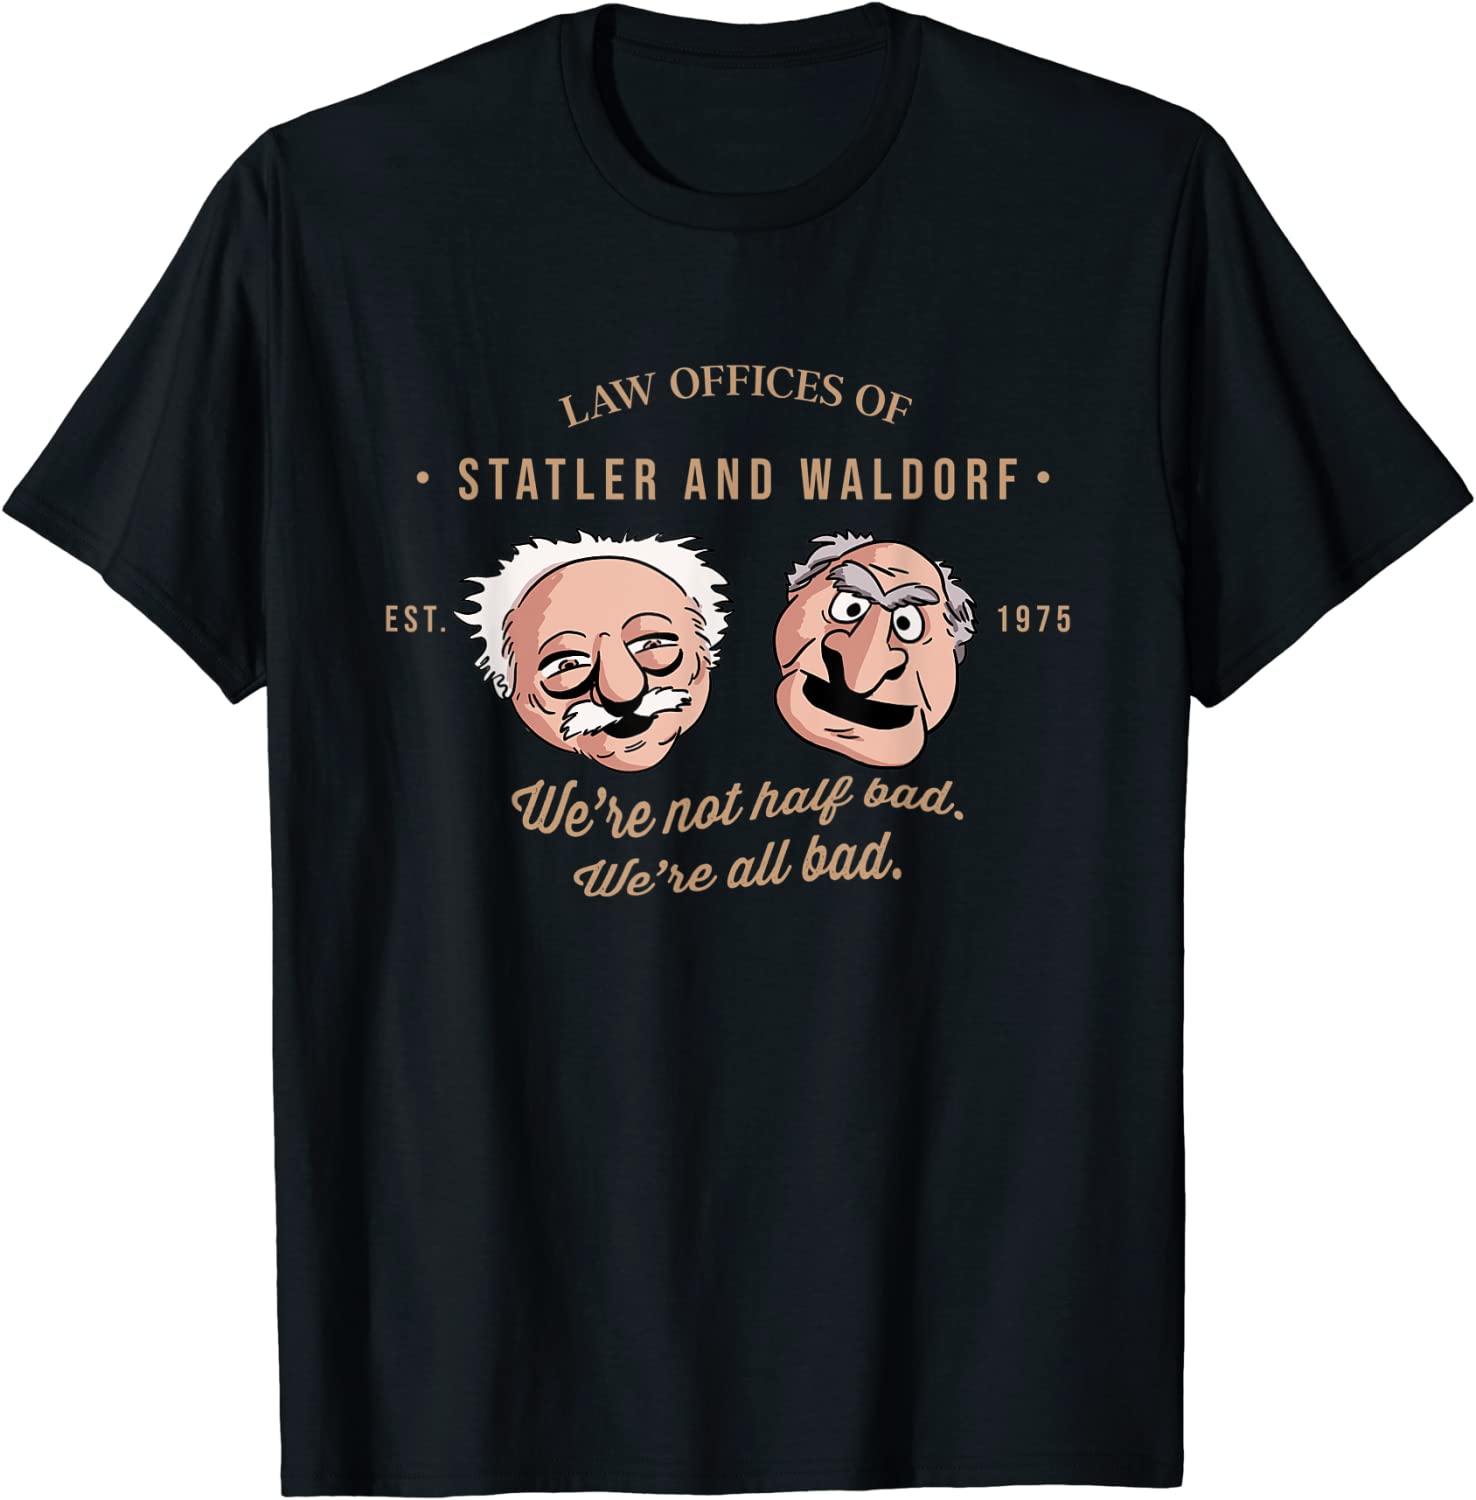 Law Offices of Statler And Waldorf -We're not Half Bad 2022 Shirt ...